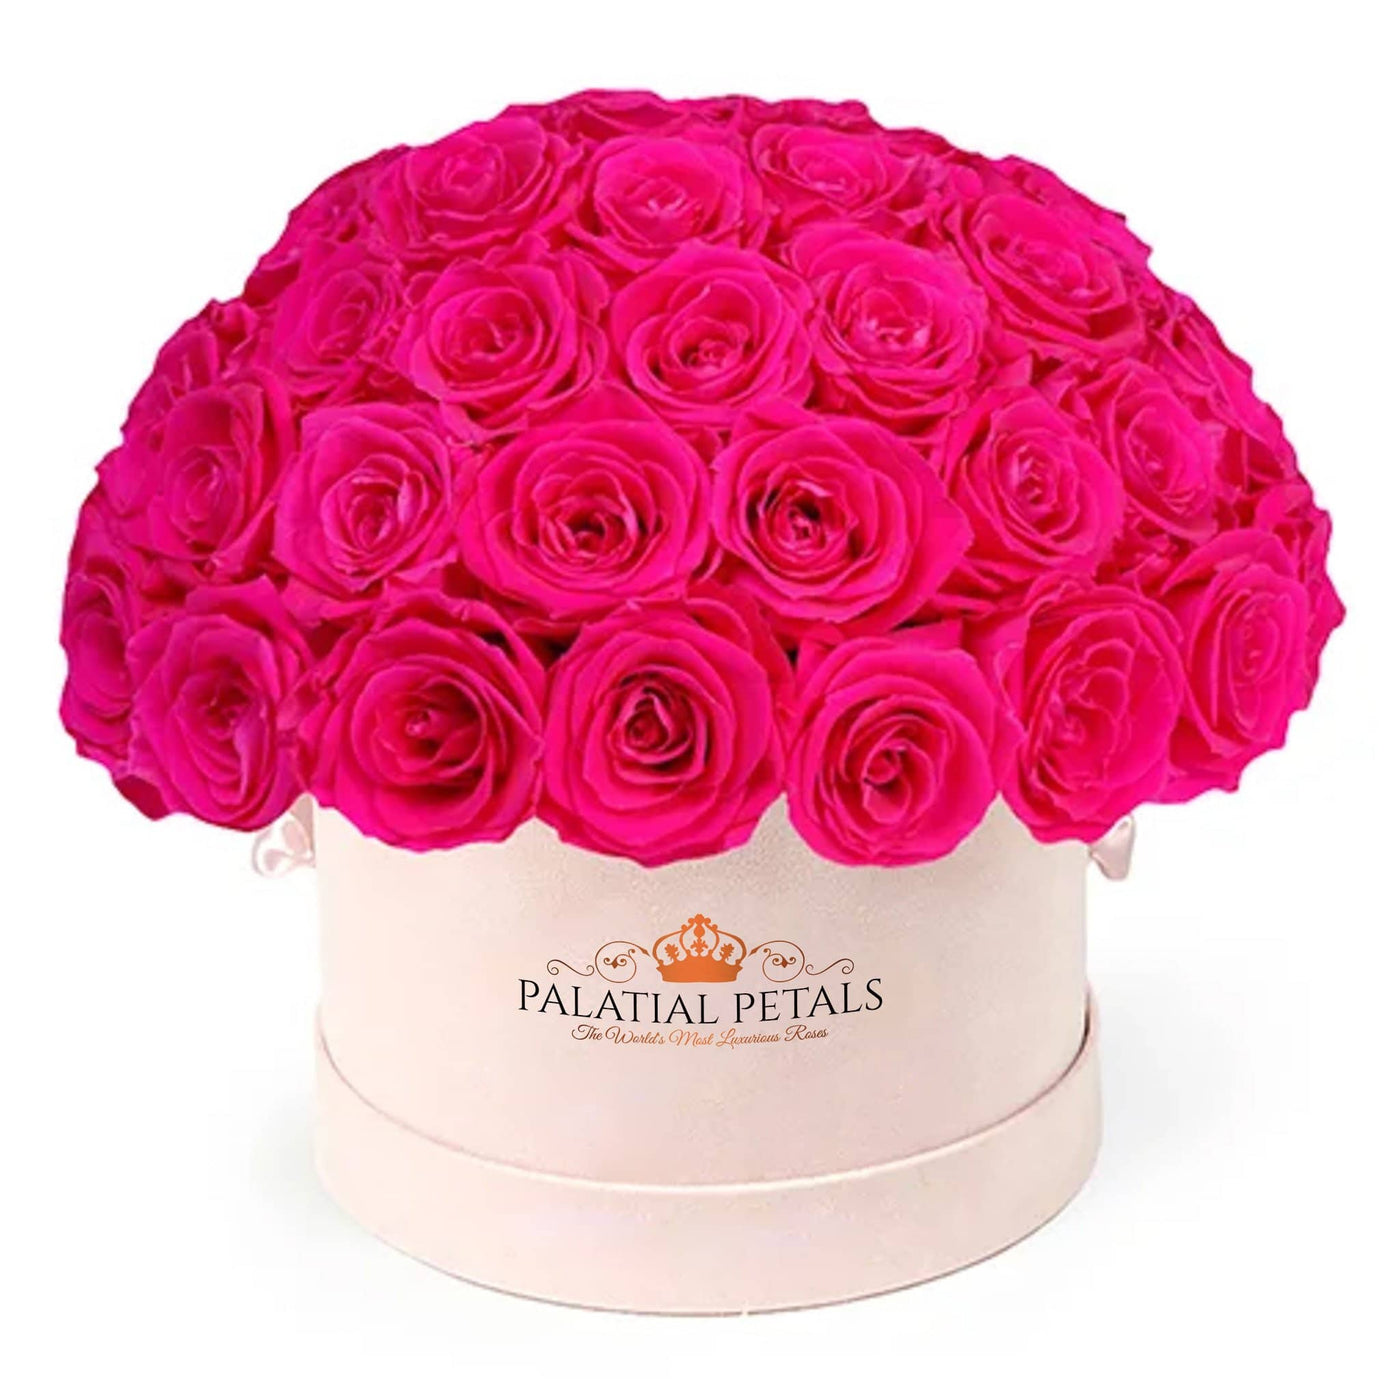 Flamingo Pink Roses That Last A Year - Classic "Dome" Rose Box